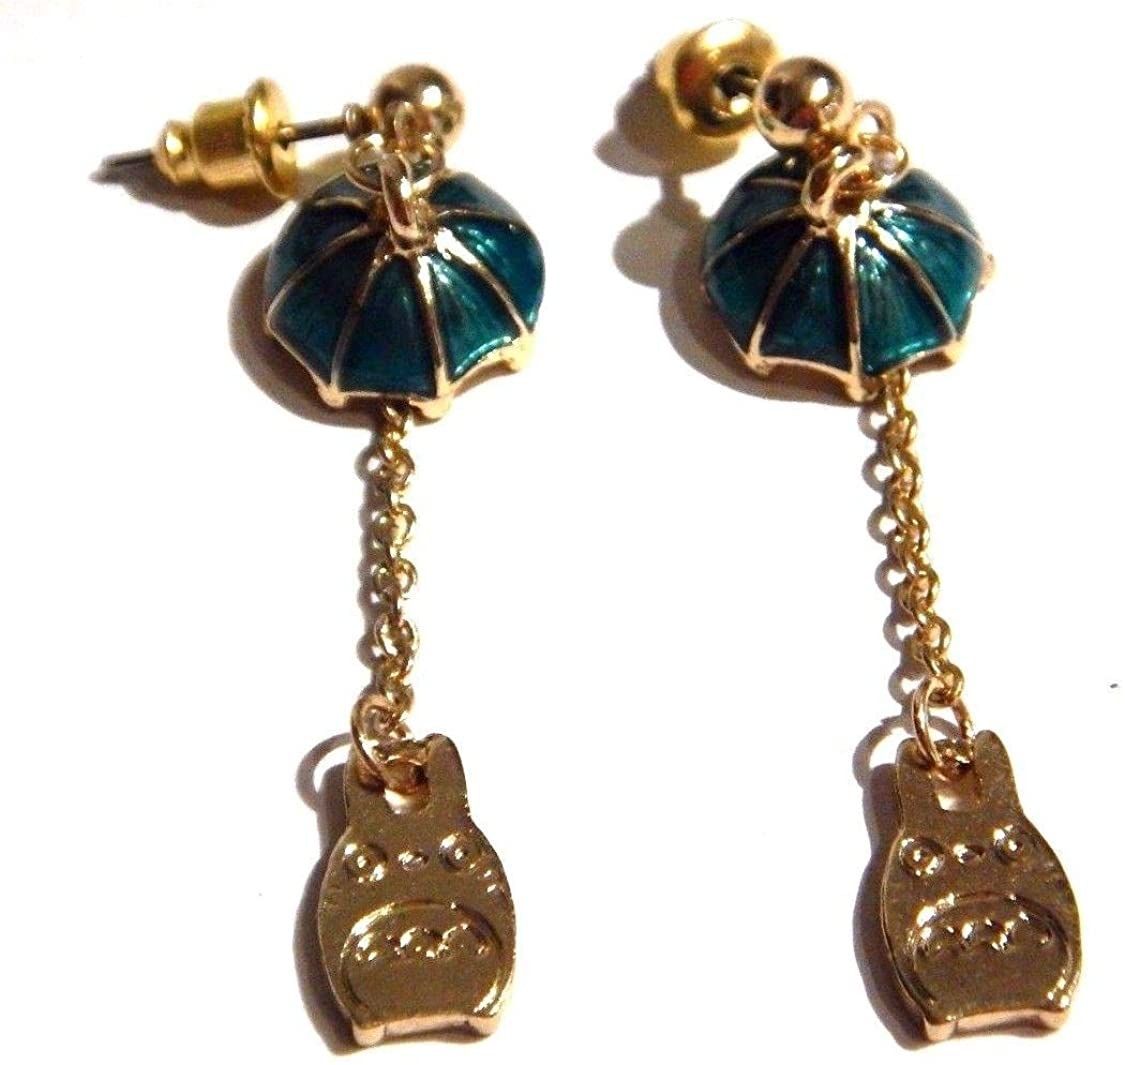 green and gold drop earrings each with a totoro charm hanging below an umbrella charm